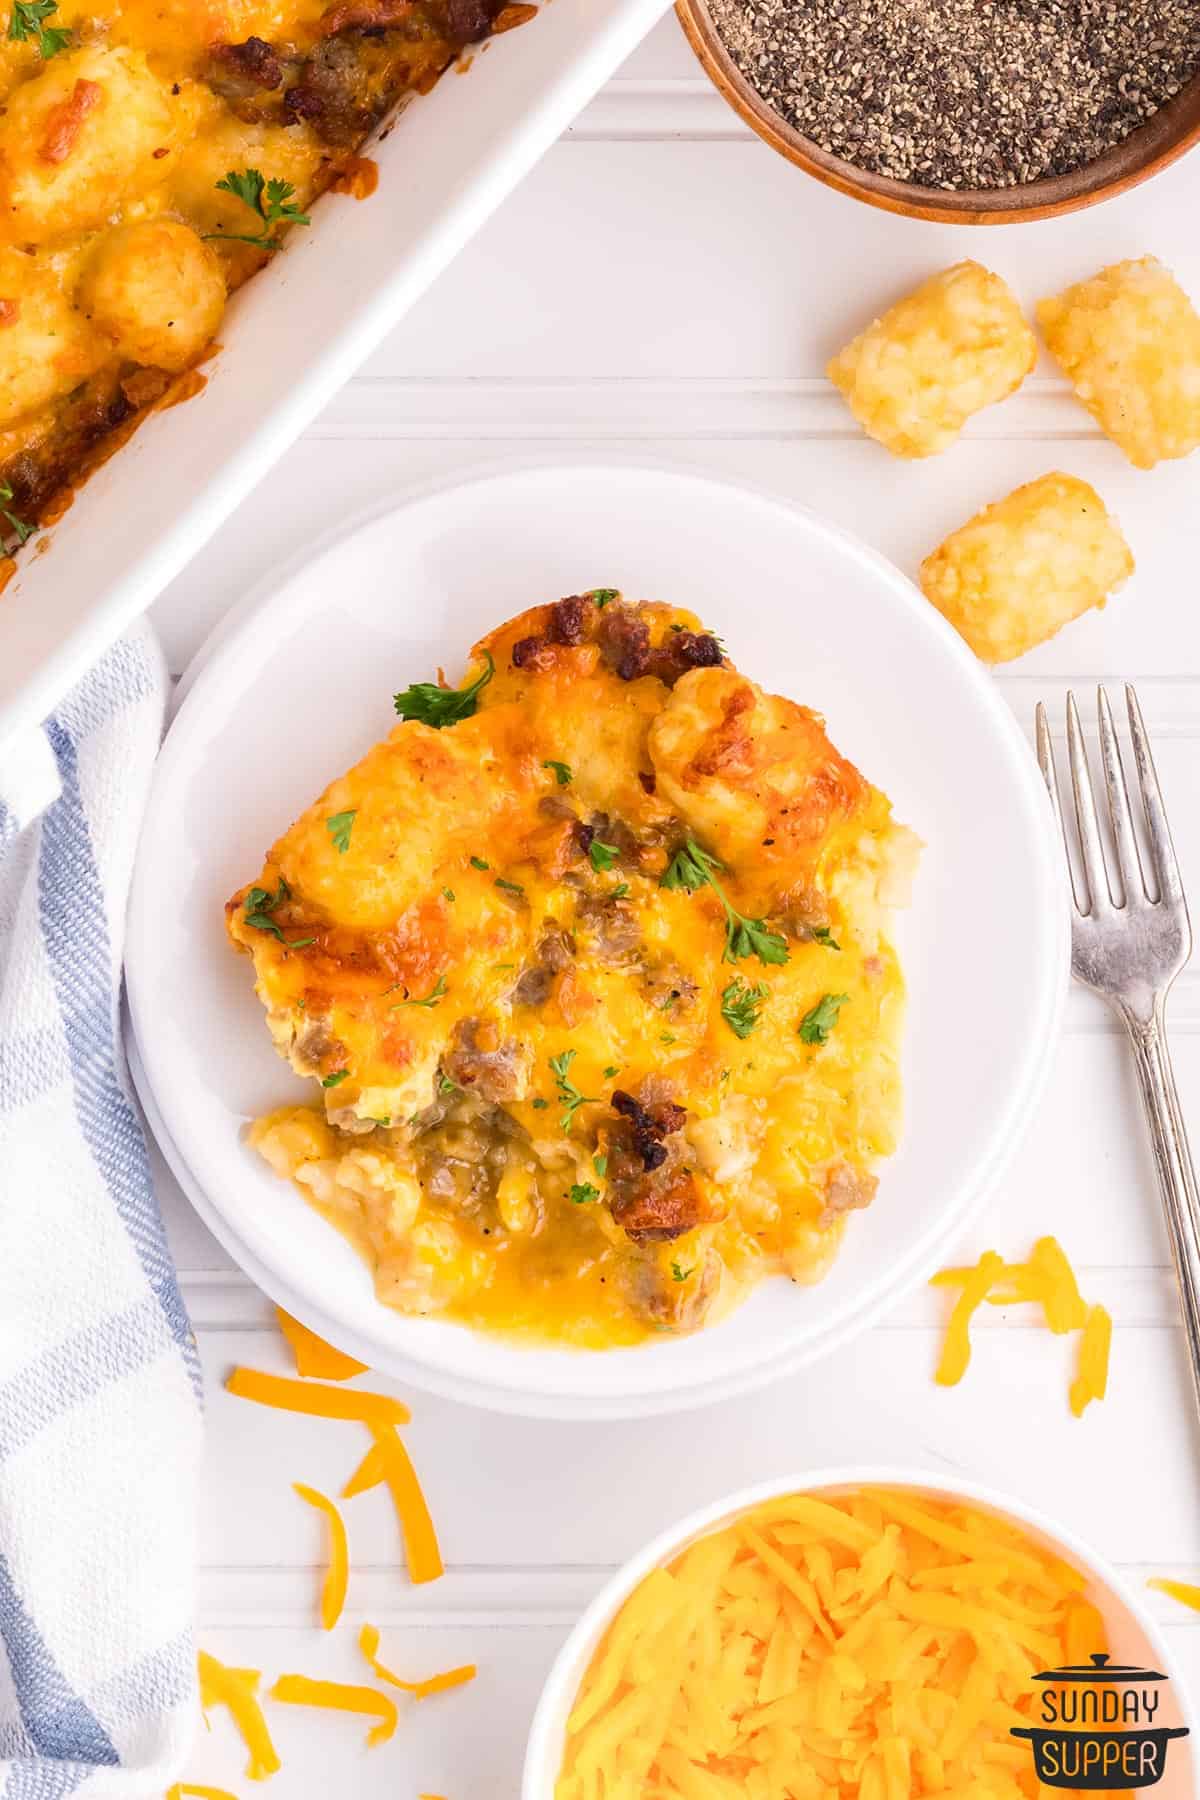 a plate of tater tot casserole with more cheese, pepper, and casserole on the side